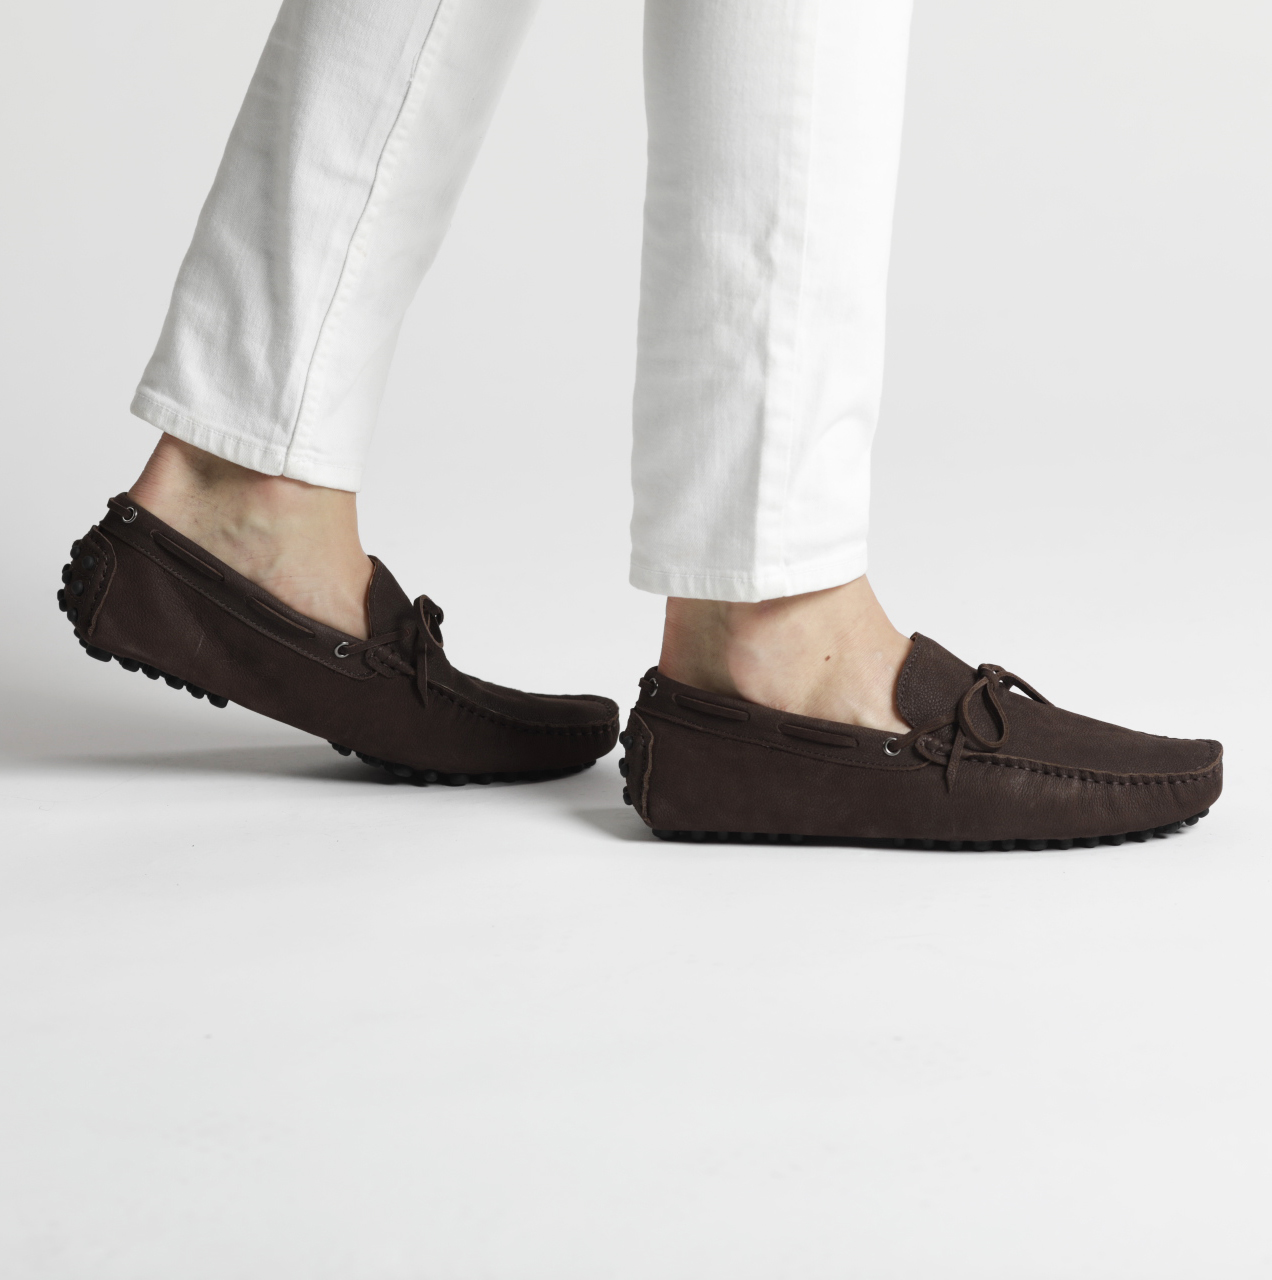 online - Buy Driving shoes and Moccasins - From Drivingshoe.com